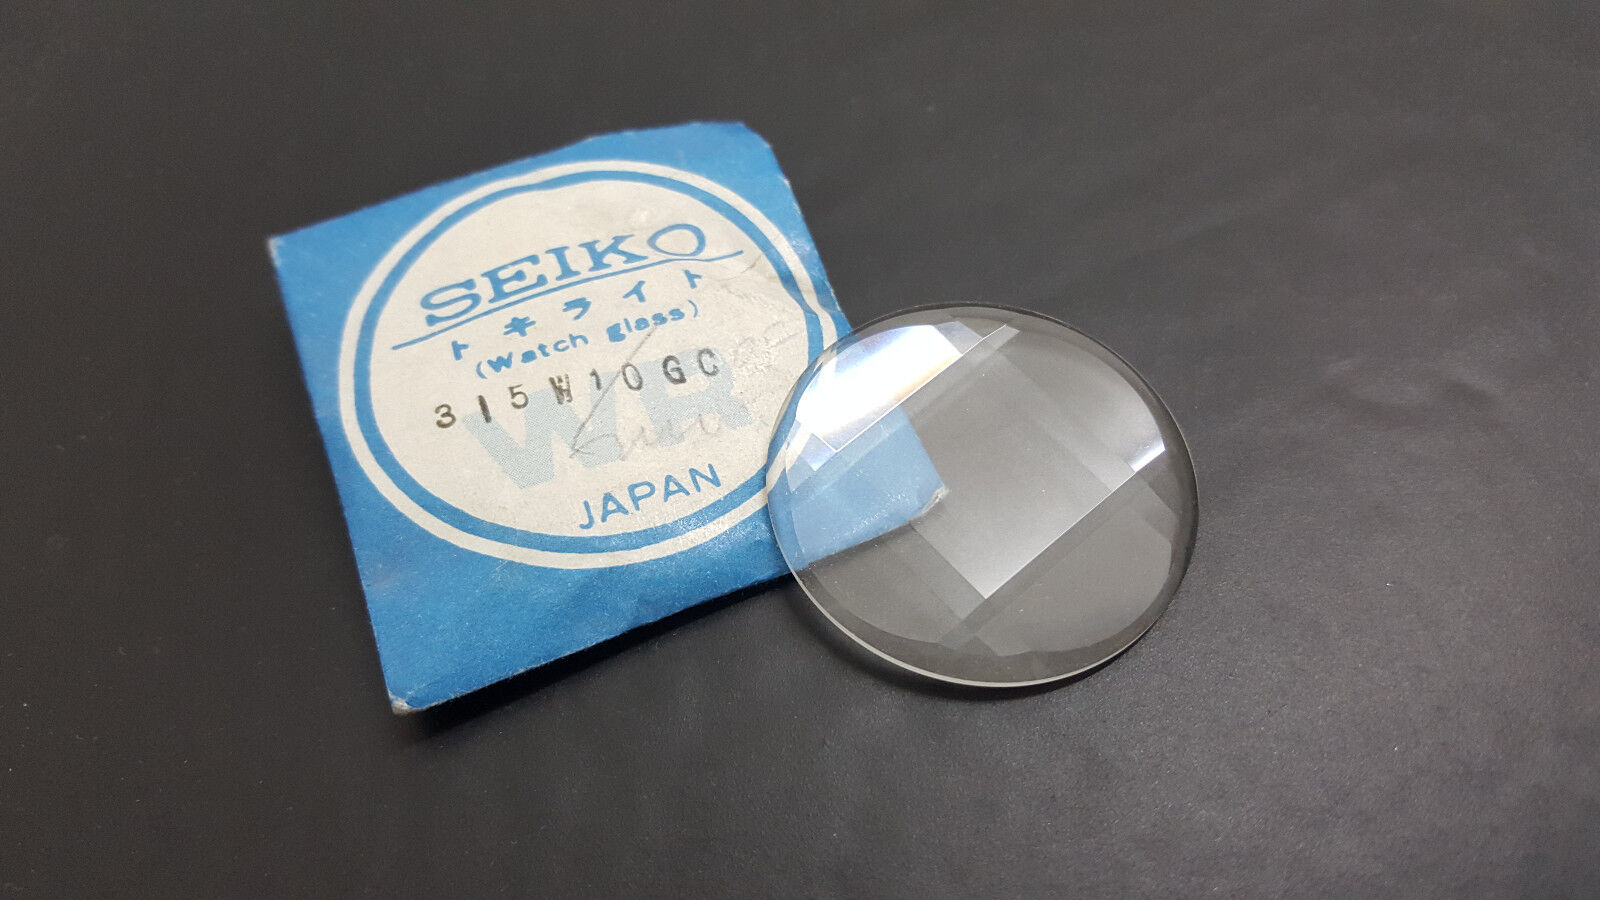 315W10GC0F Genuine Seiko Faceted Crystal Glass Seiko 7546 -8430 /A /B /F /H /S